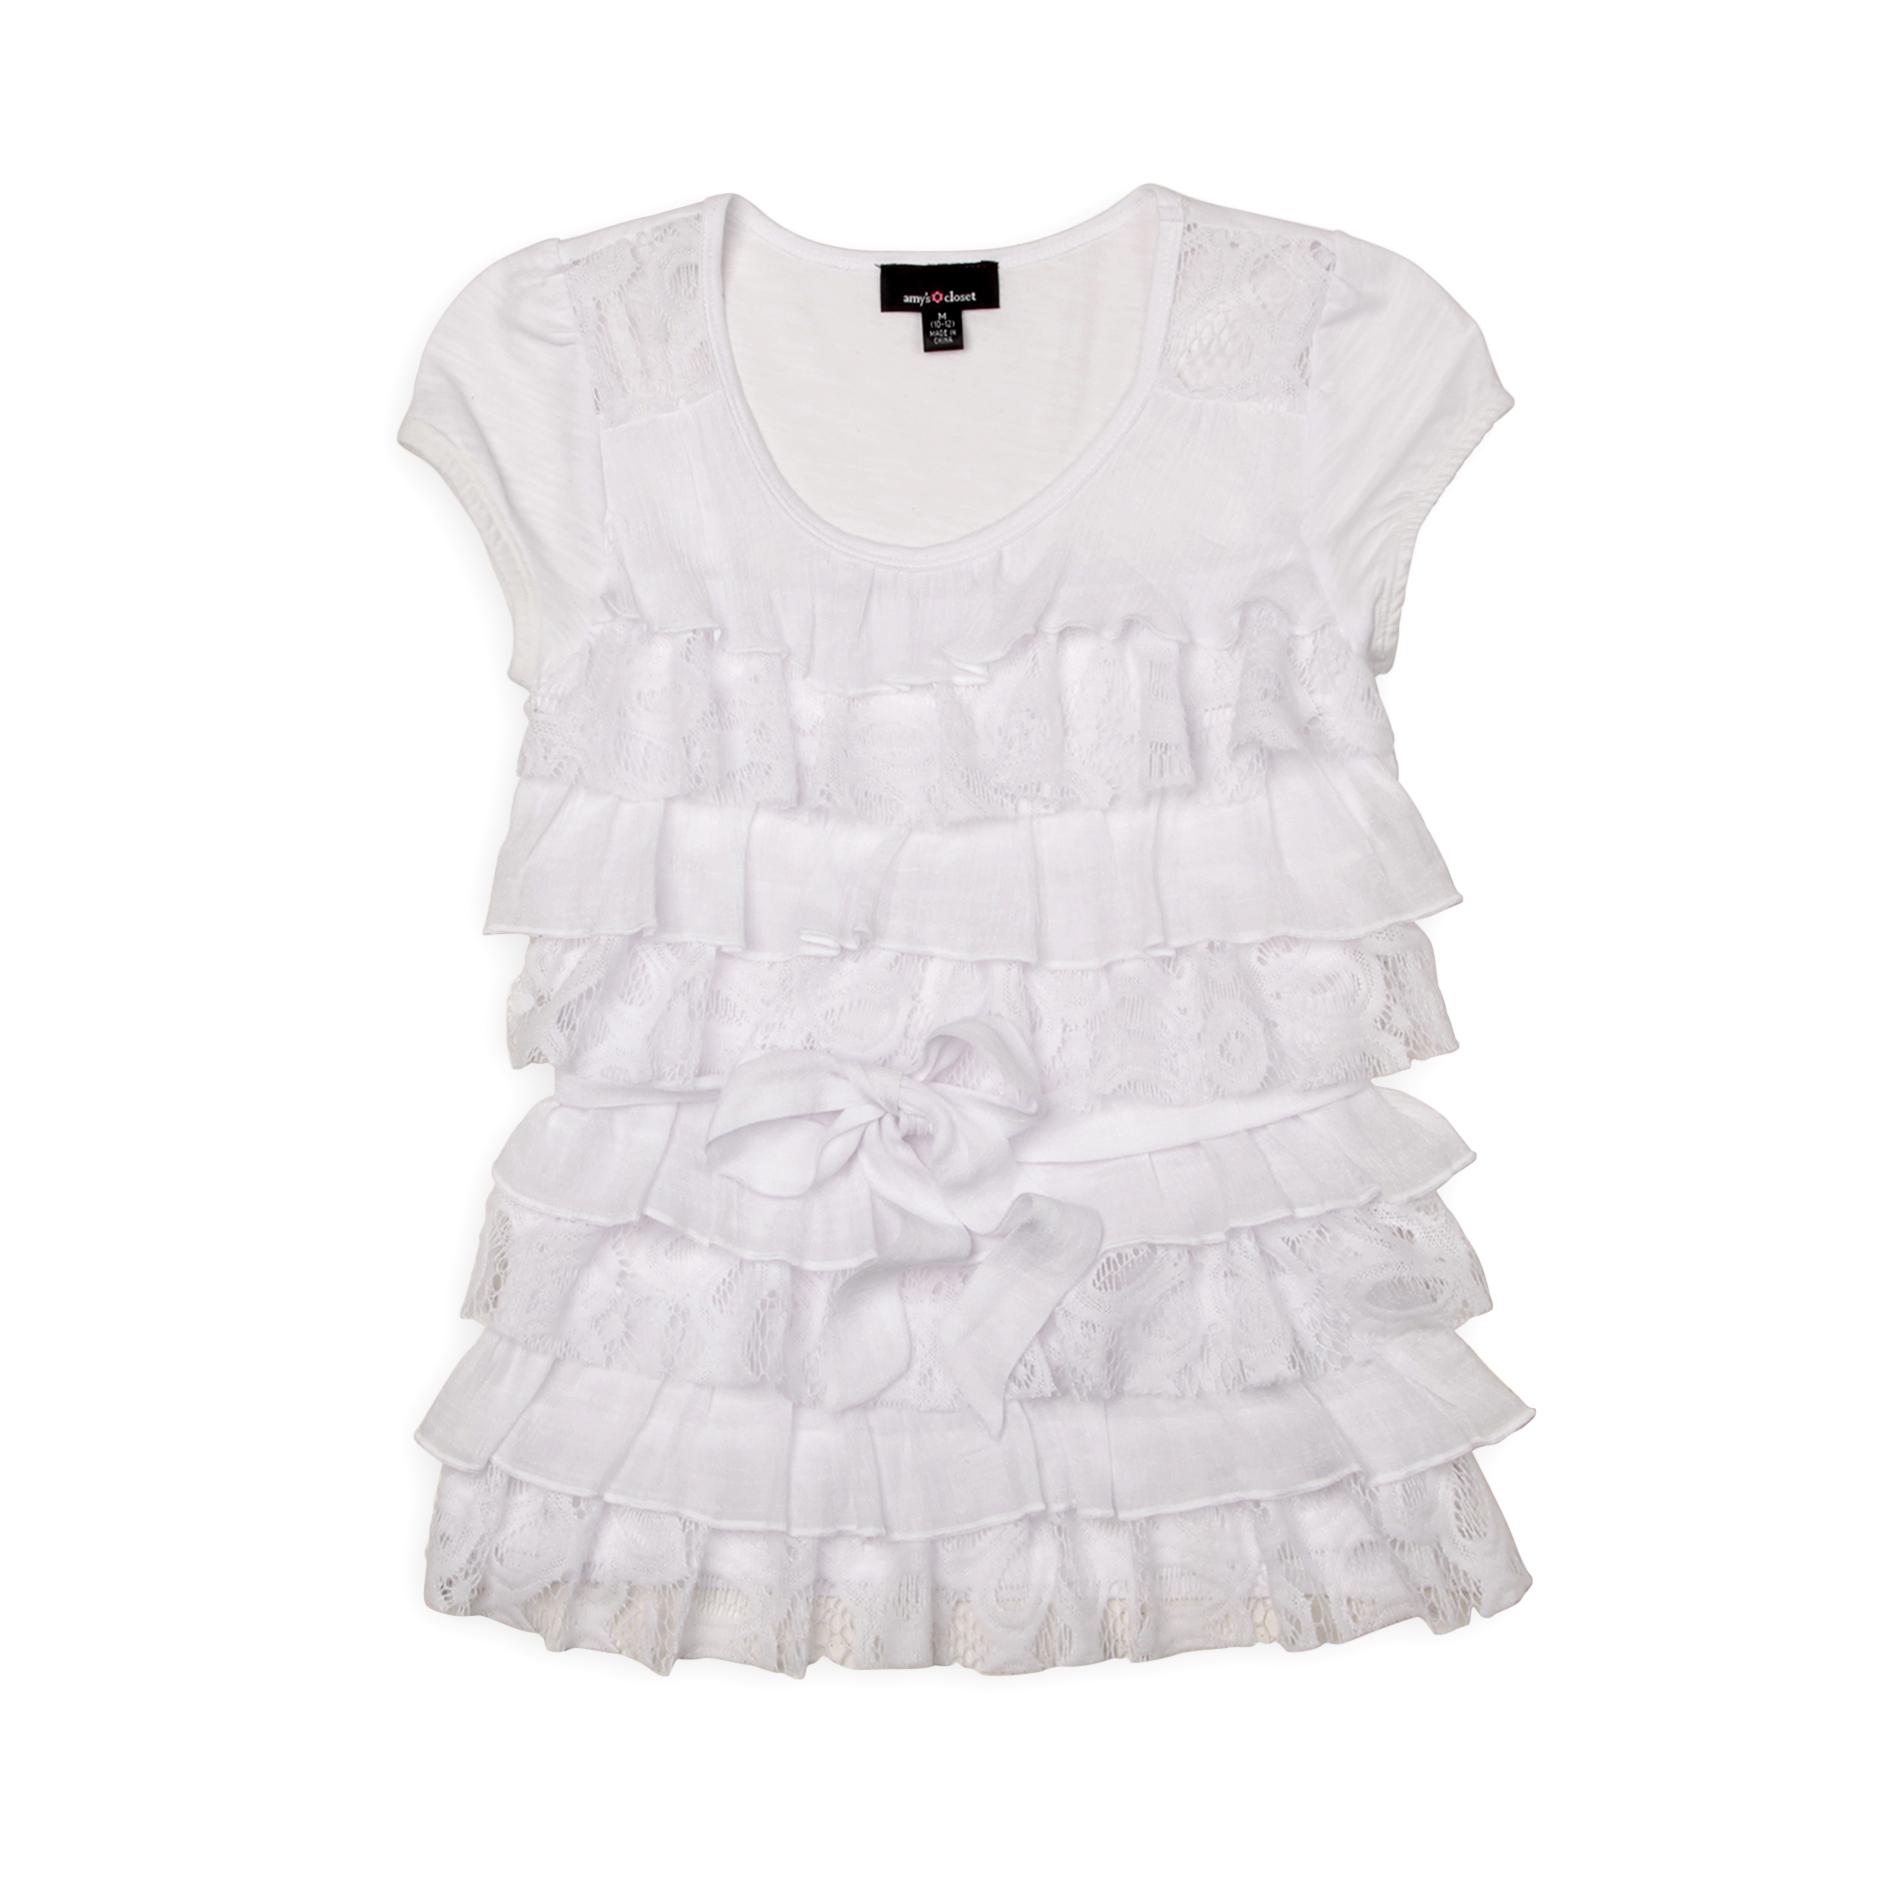 Amy's Closet Girl's Tiered Lace Ruffle Top